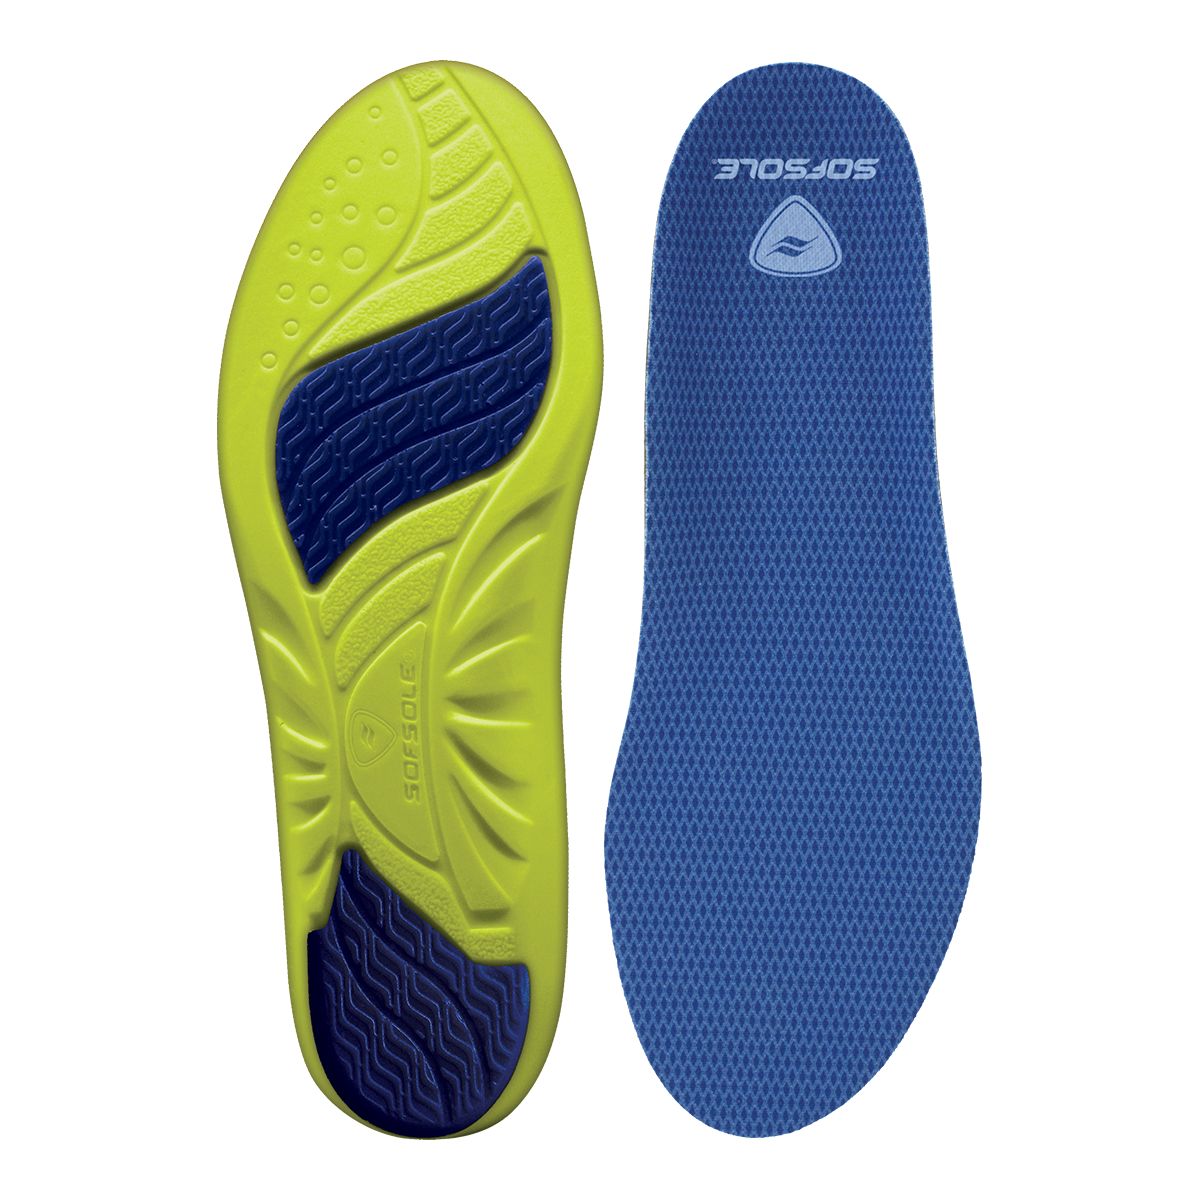 Women's Shoe and boot Insoles | Tradehome Shoes